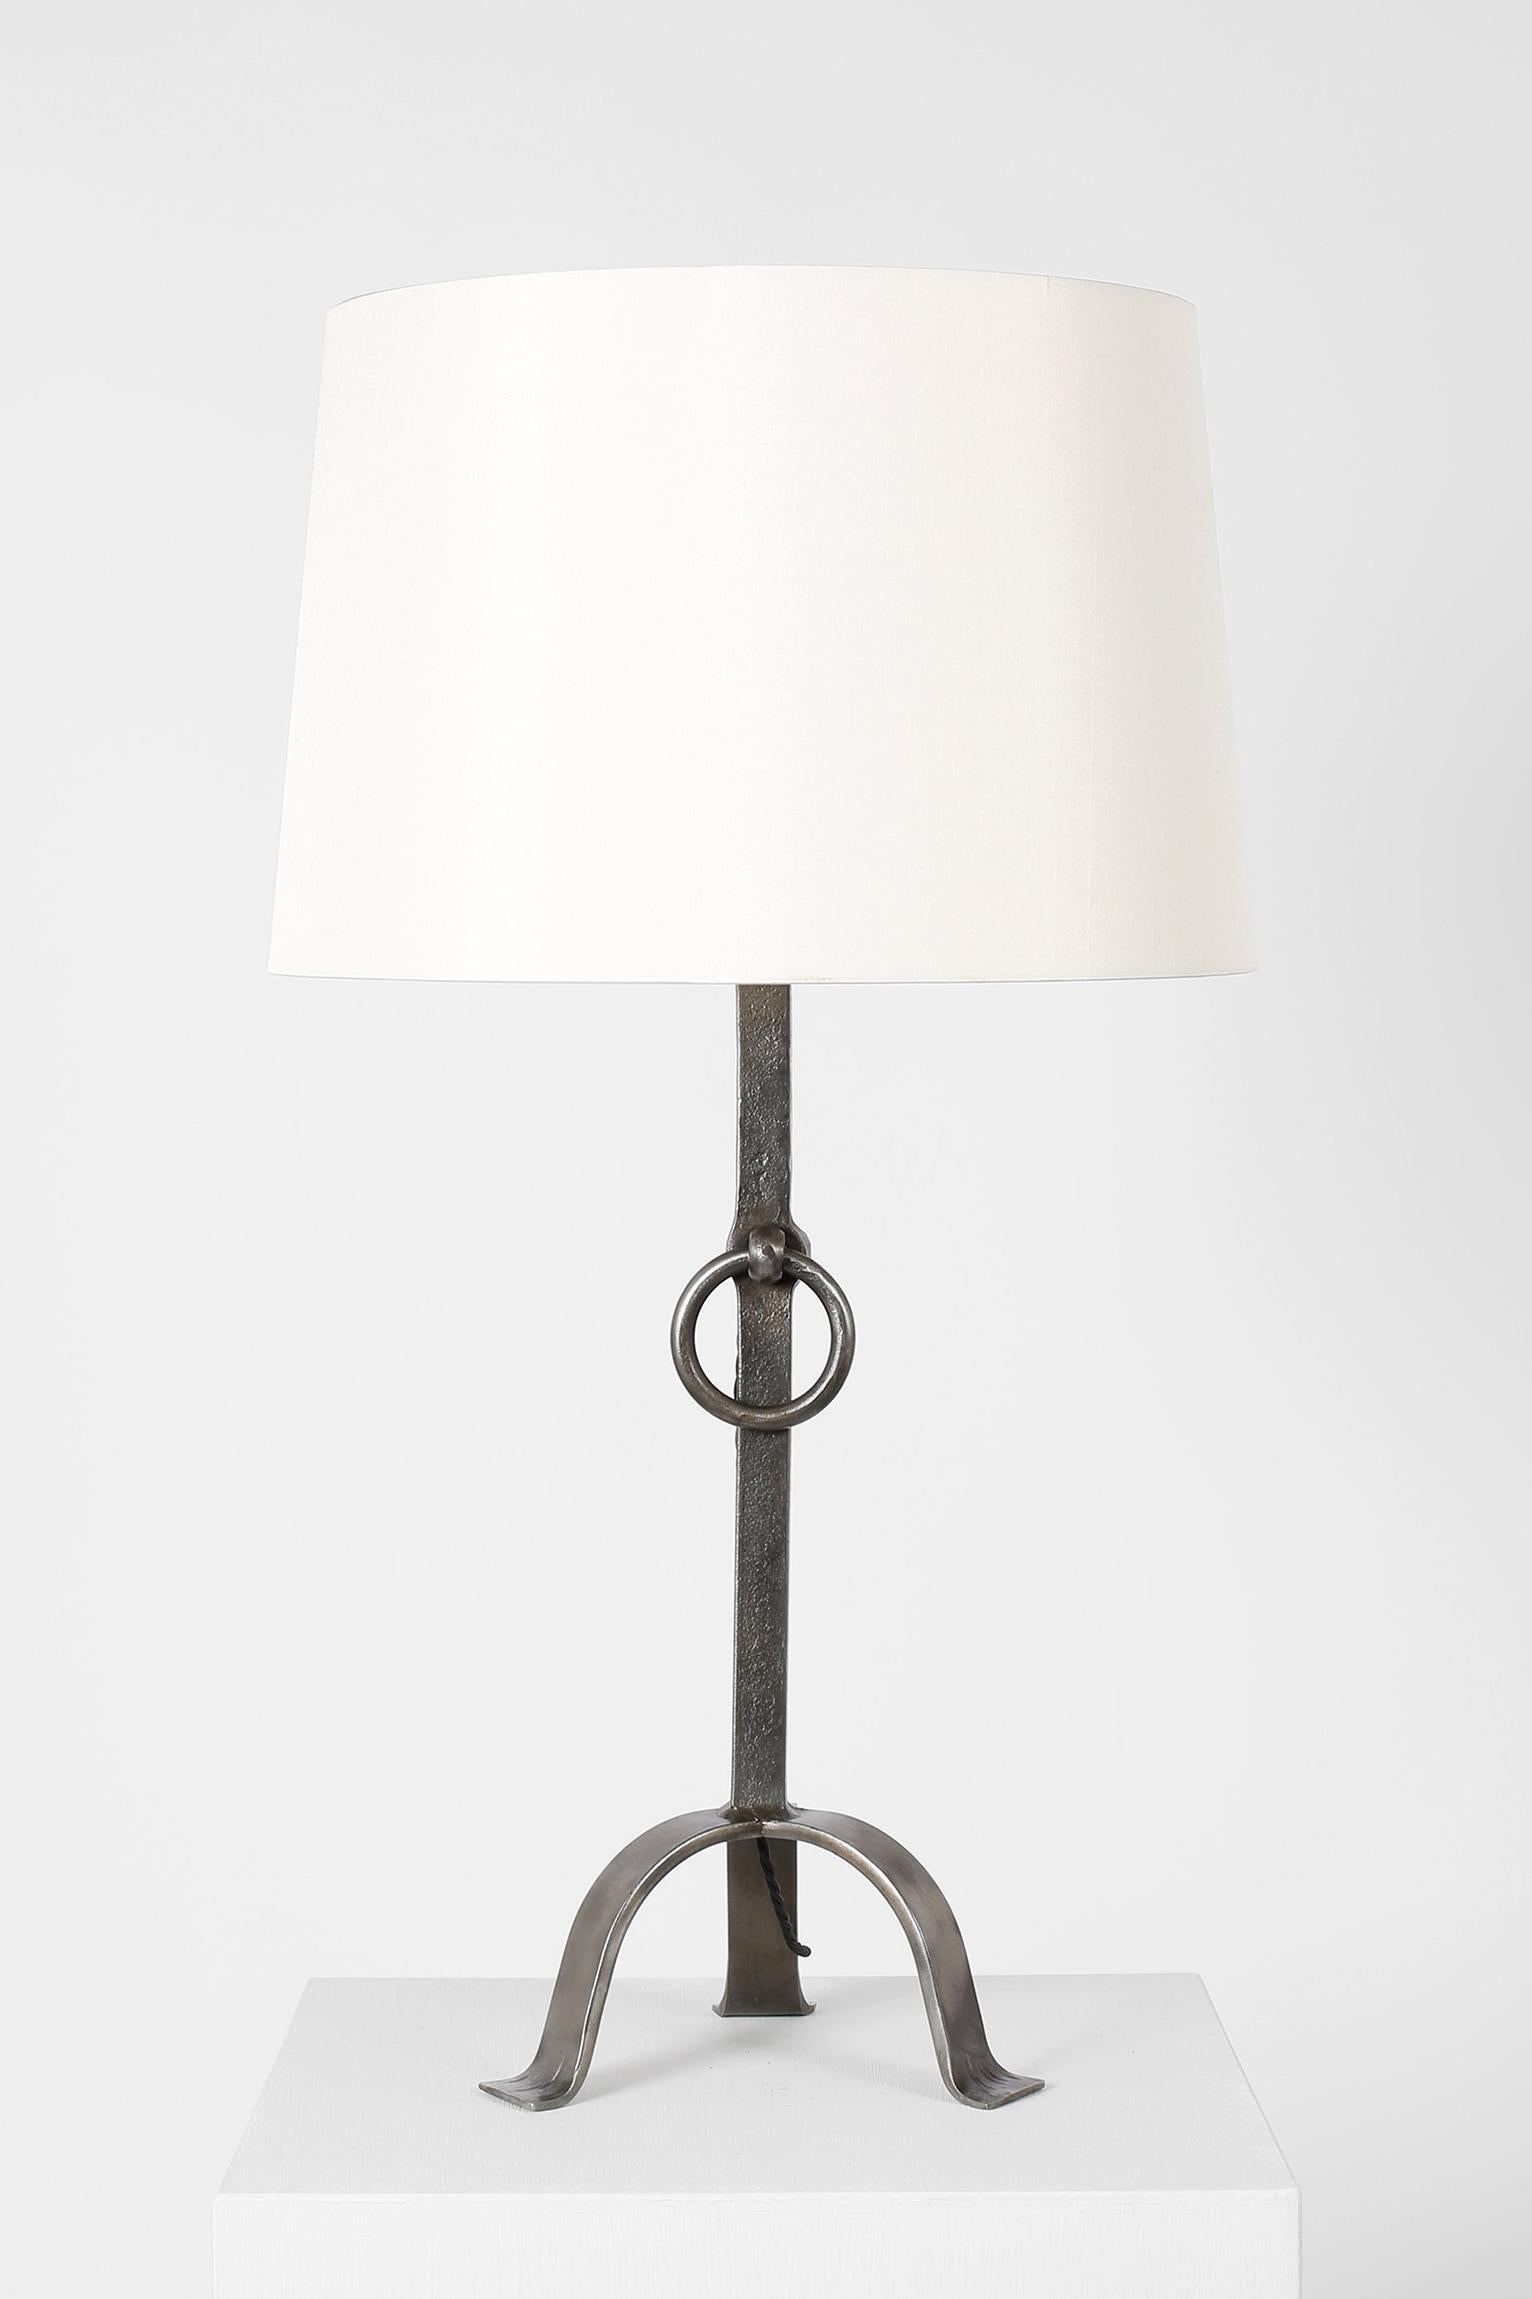 A large forged iron table lamp with decorative ring, in the taste of Les Artisans de Marolles. 
French, circa 1950.
Measures: With the shade: 71 cm high by 40 cm diameter
Lamp base only: 51 cm high by 23 cm diameter.